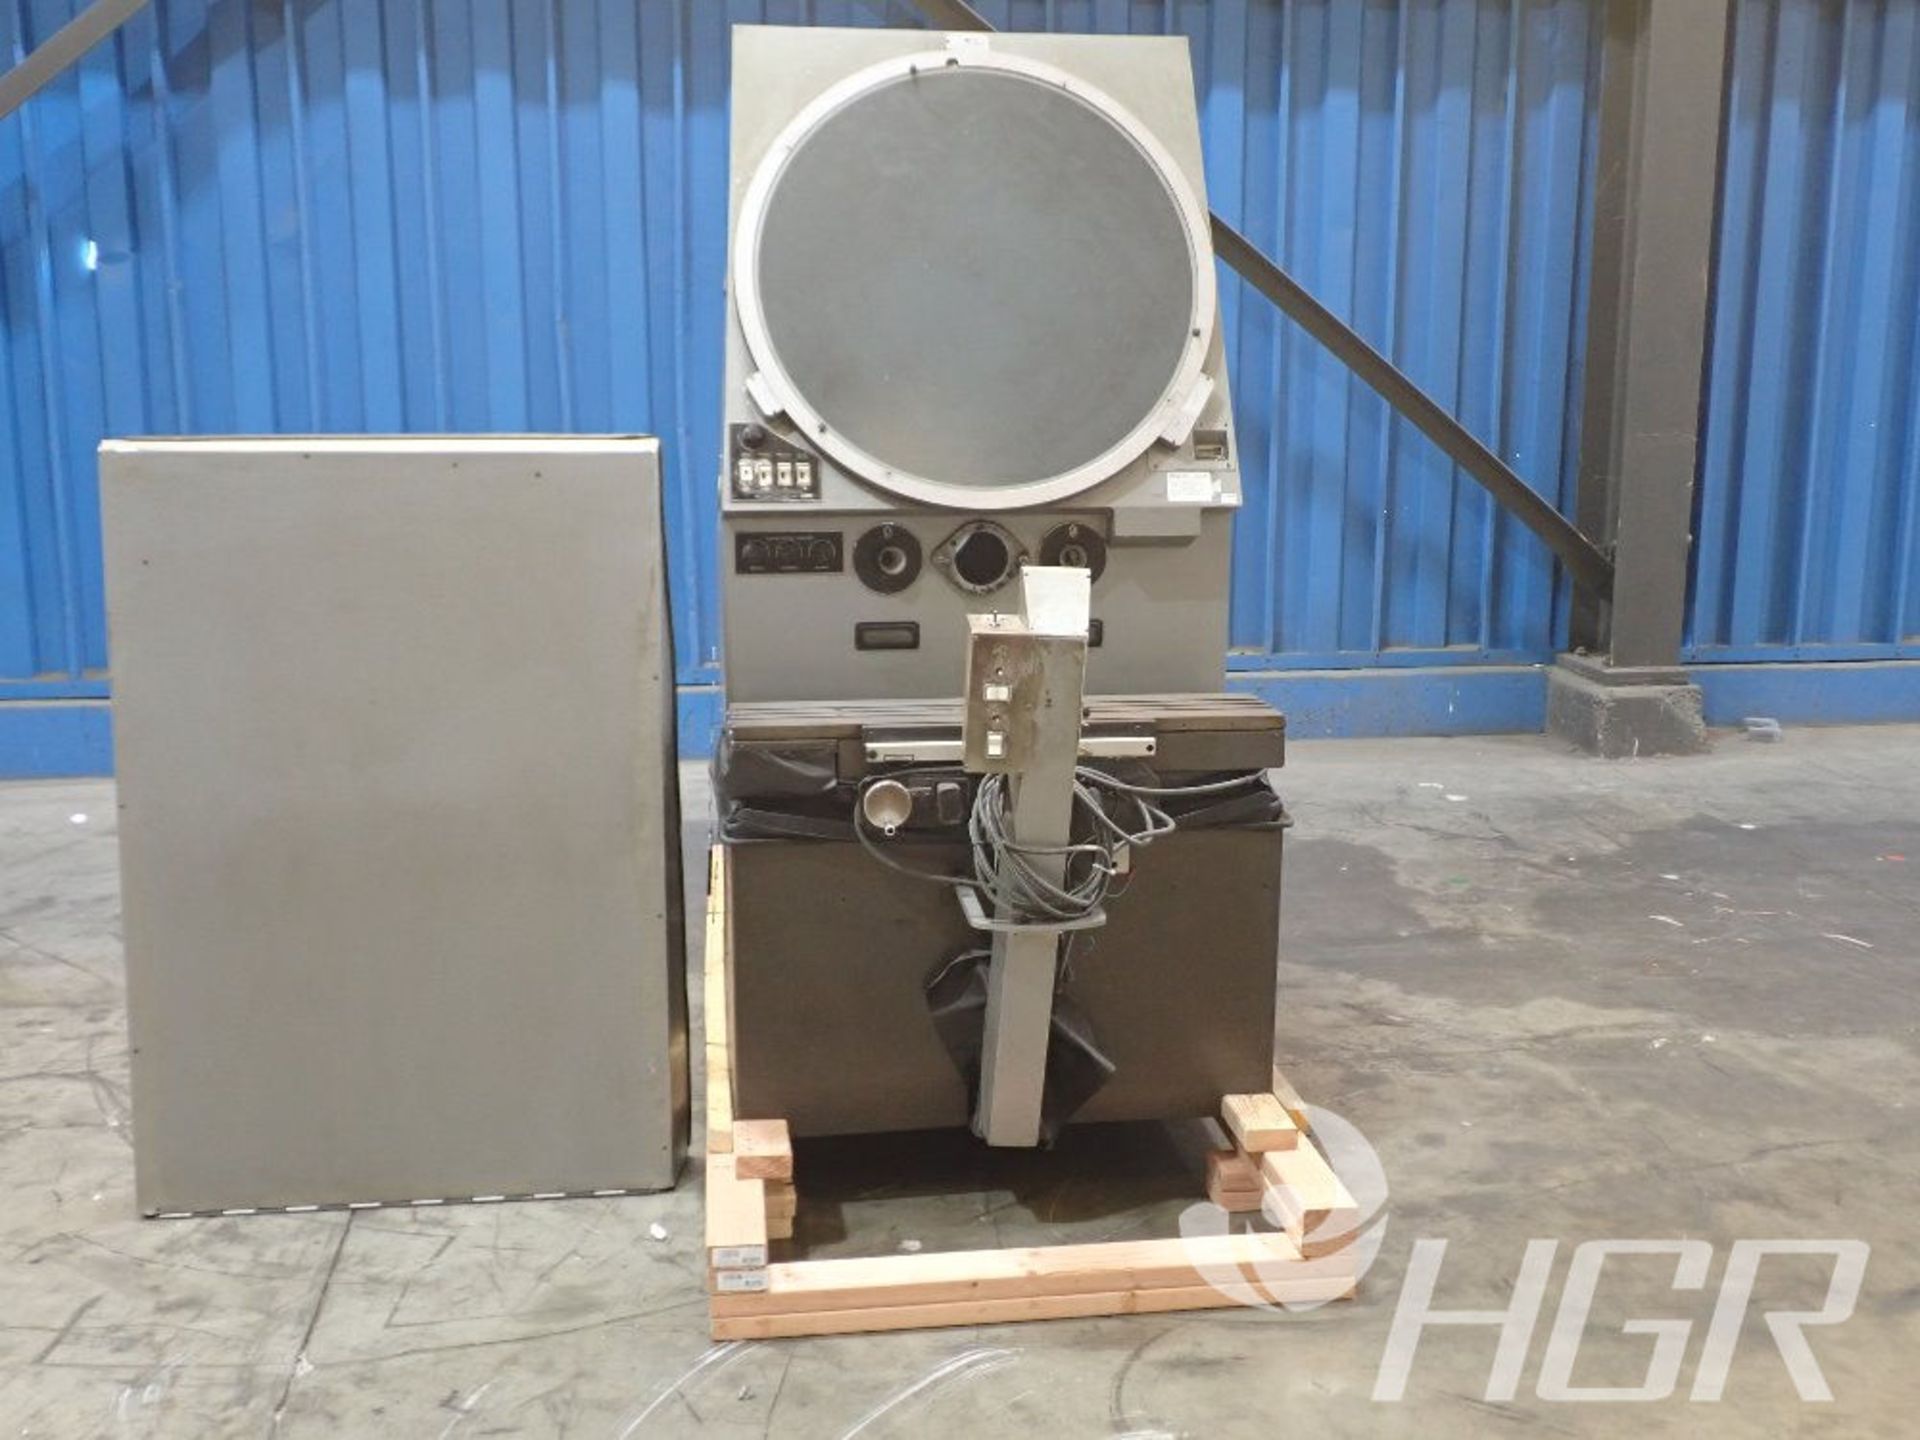 SCHERR TUMICO COMPARATOR, Model 22-2500, Date: n/a; s/n n/a, Approx. Capacity: 30", Power: 1/60/115, - Image 2 of 15